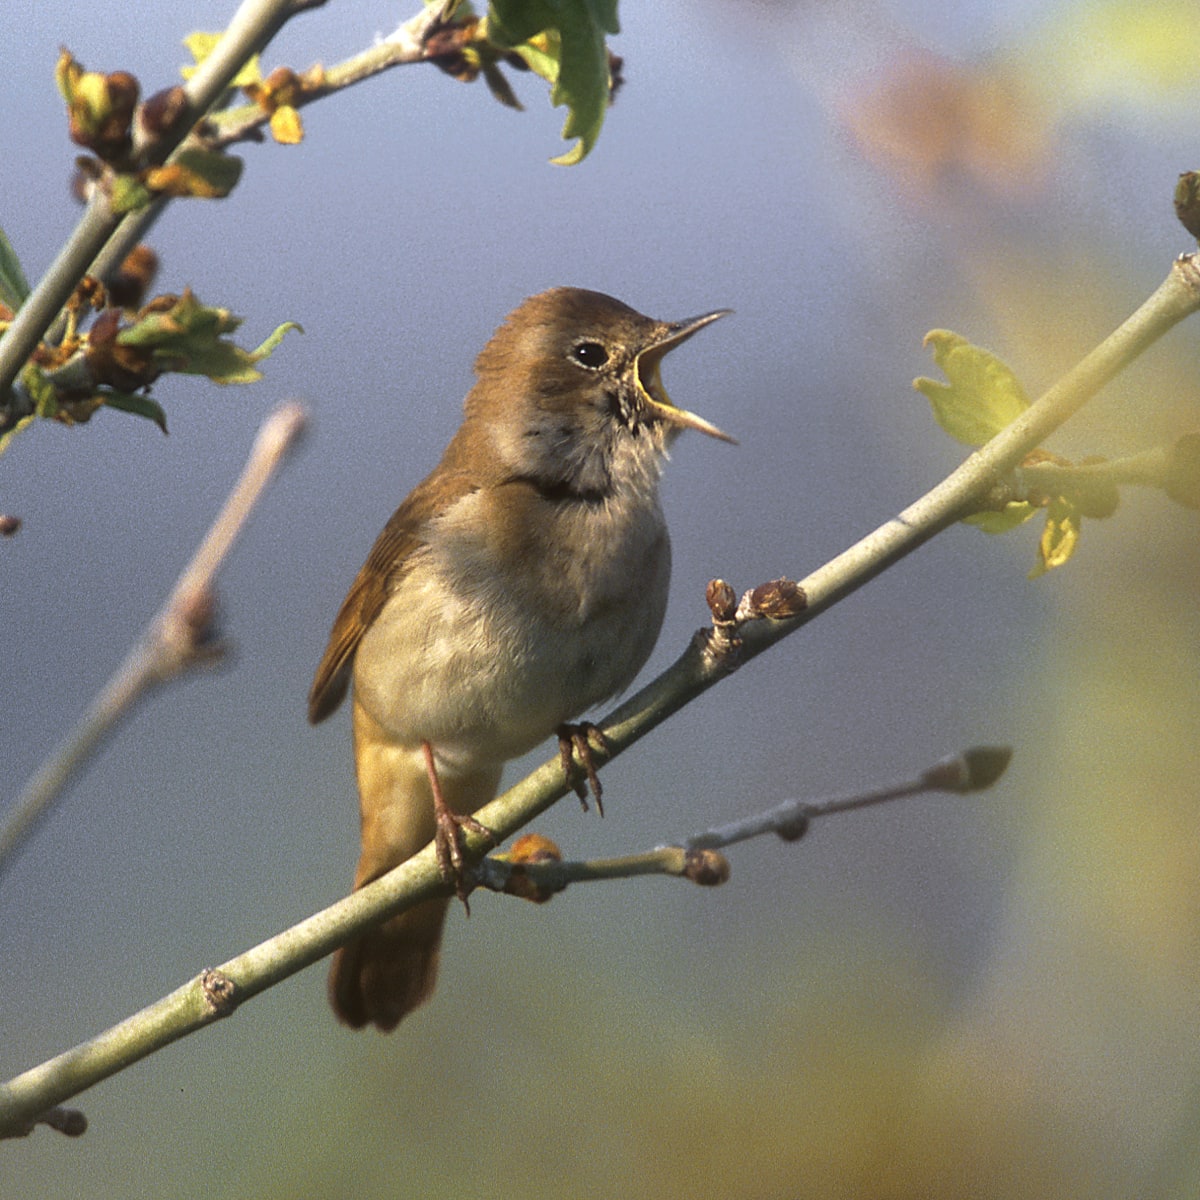 Nightingale singing, The best bird song in the world